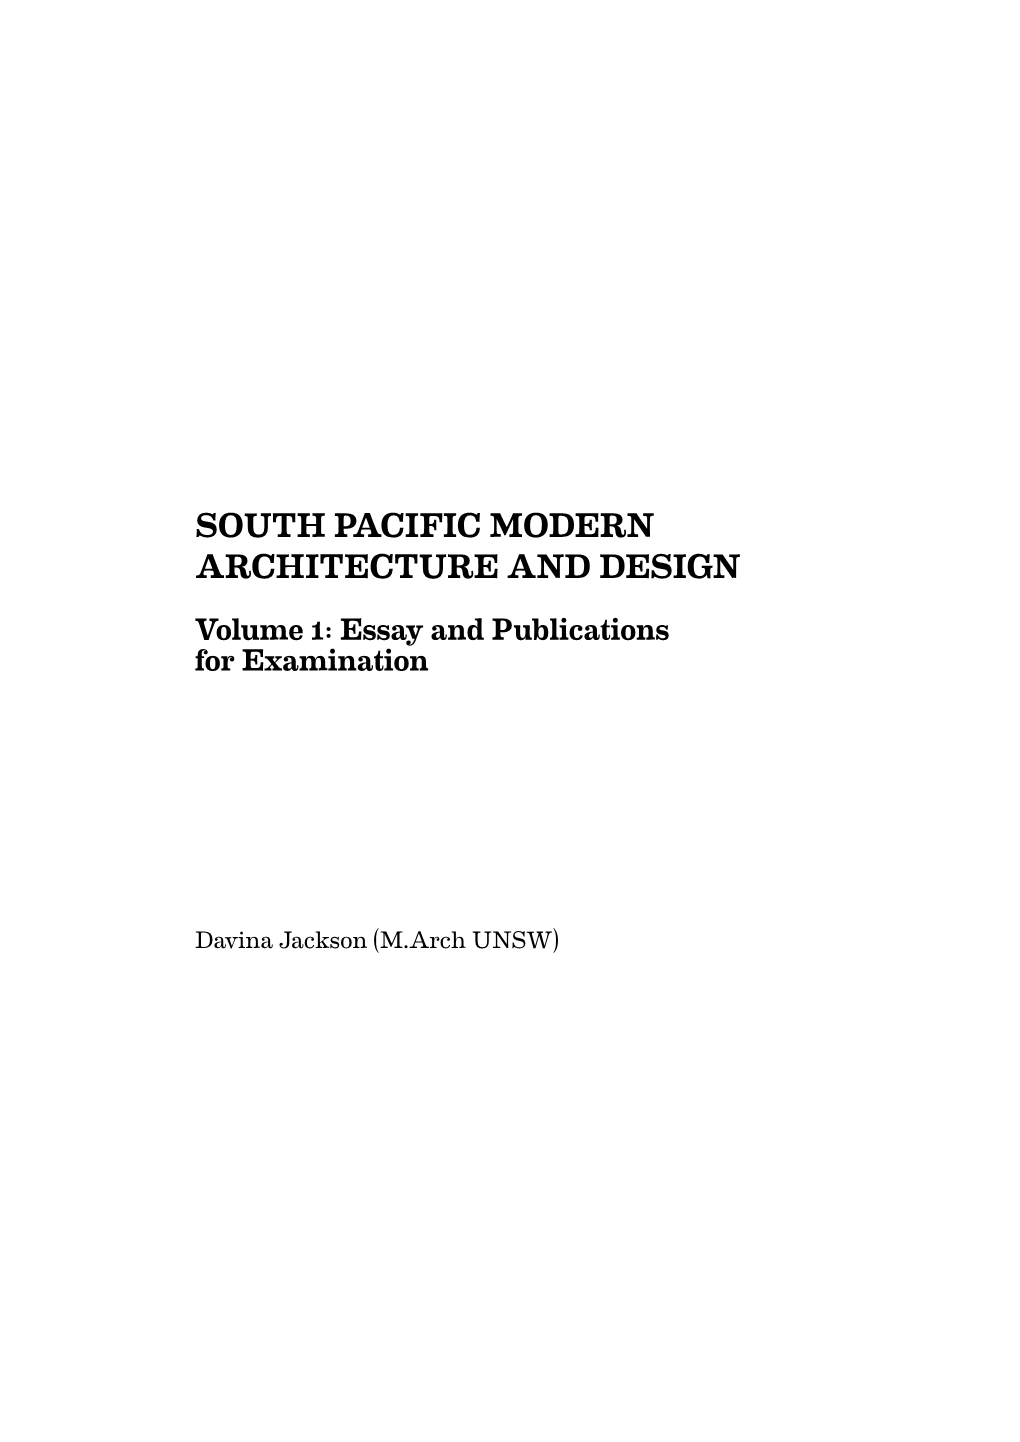 SOUTH PACIFIC MODERN ARCHITECTURE and DESIGN Volume 1: Essay and Publications for Examination